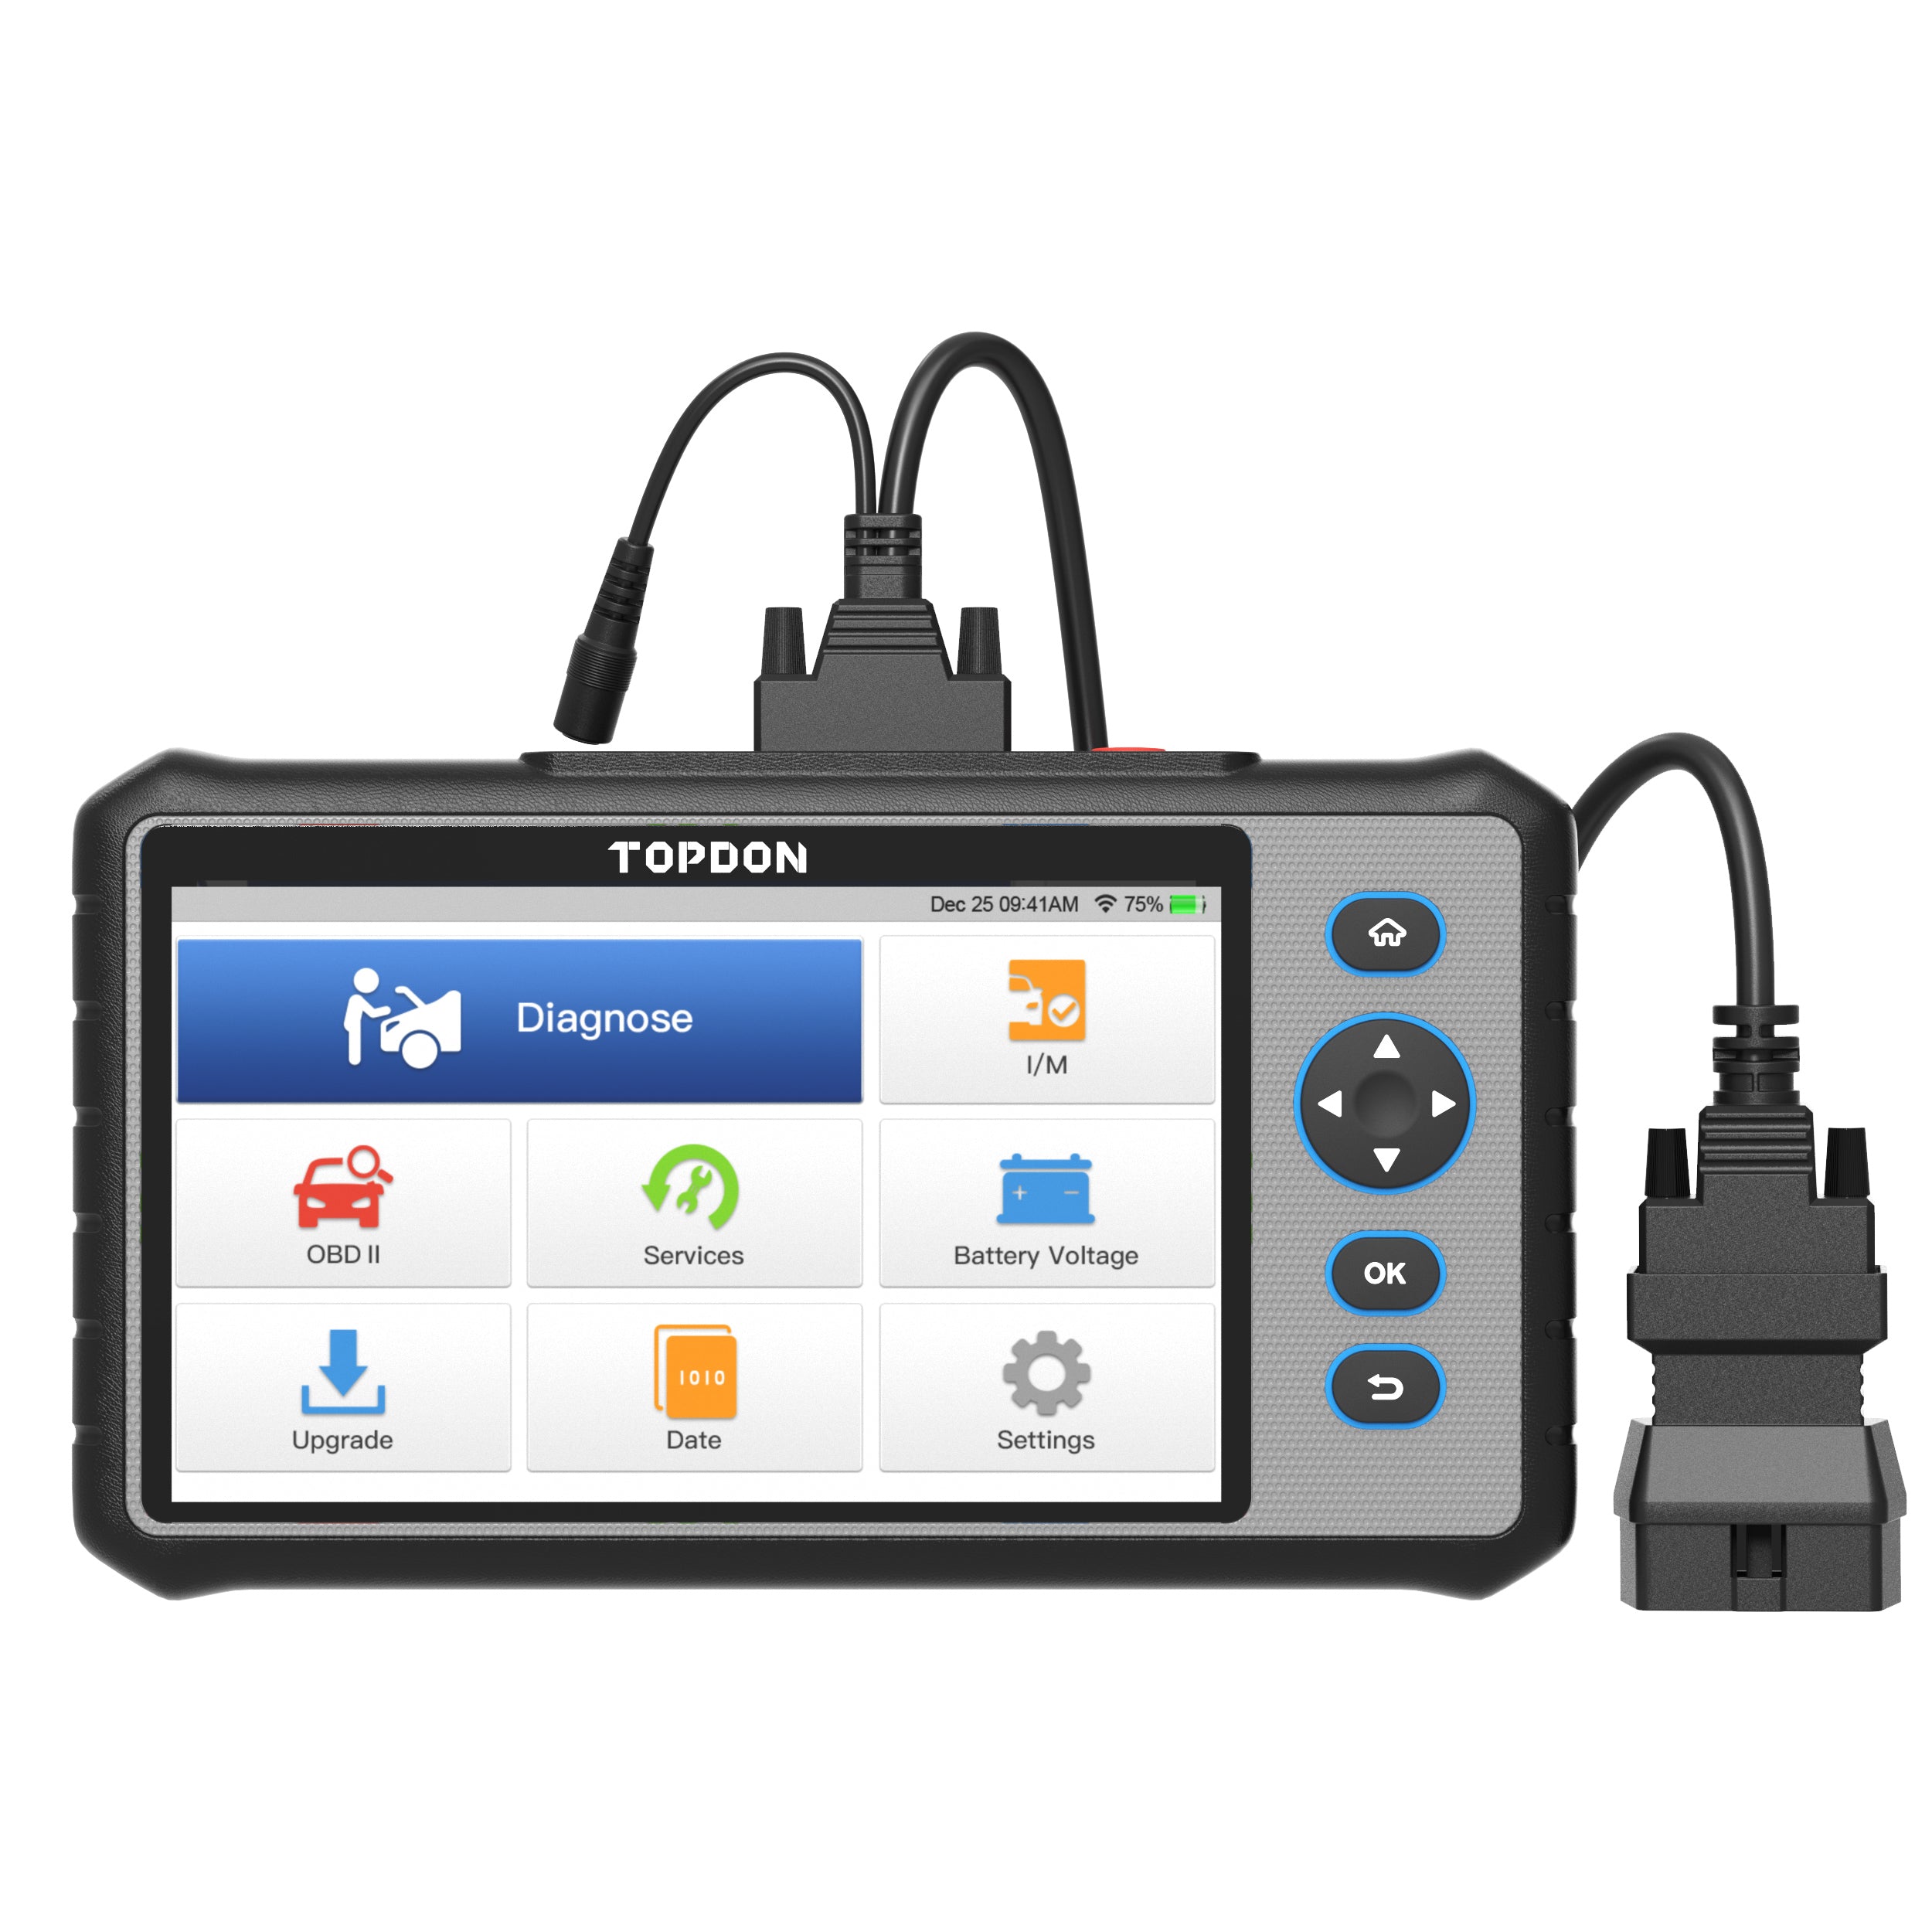 TOPDON ArtiDiag800BT Car Diagnostic Tool with all systems diagnosis, OBD2  scanner with 28 Maintenance Services:Oil Reset/EPB/SAS/TPMS/DPFWireless  Diagnostic Scanner, AutoVIN, Free Lifetime Upgrade. : :  Automotive